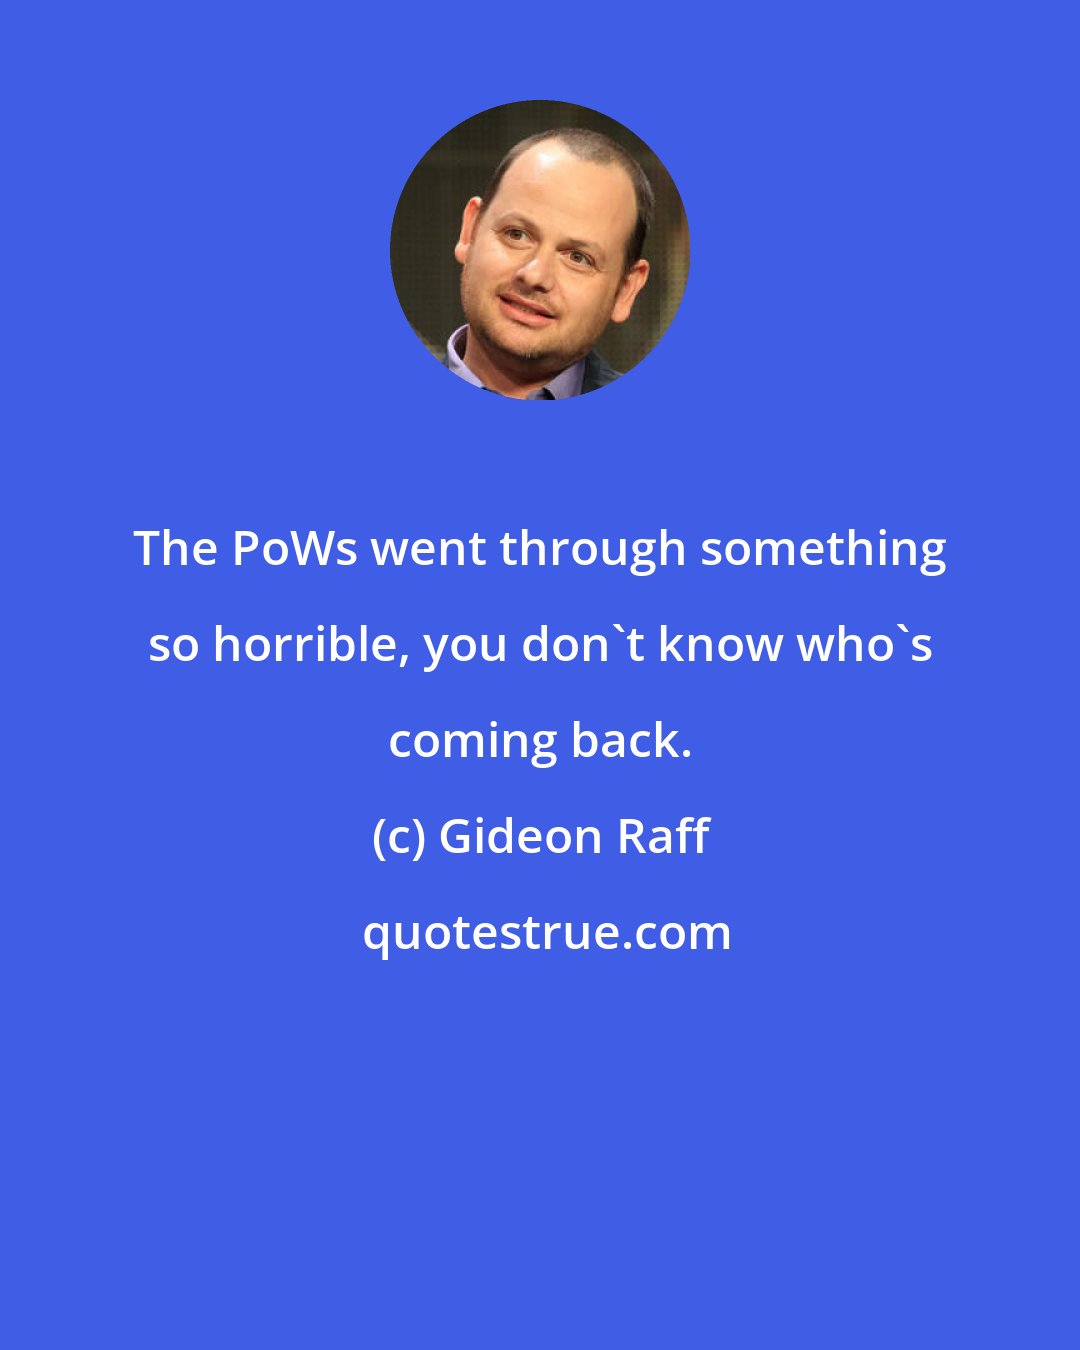 Gideon Raff: The PoWs went through something so horrible, you don't know who's coming back.